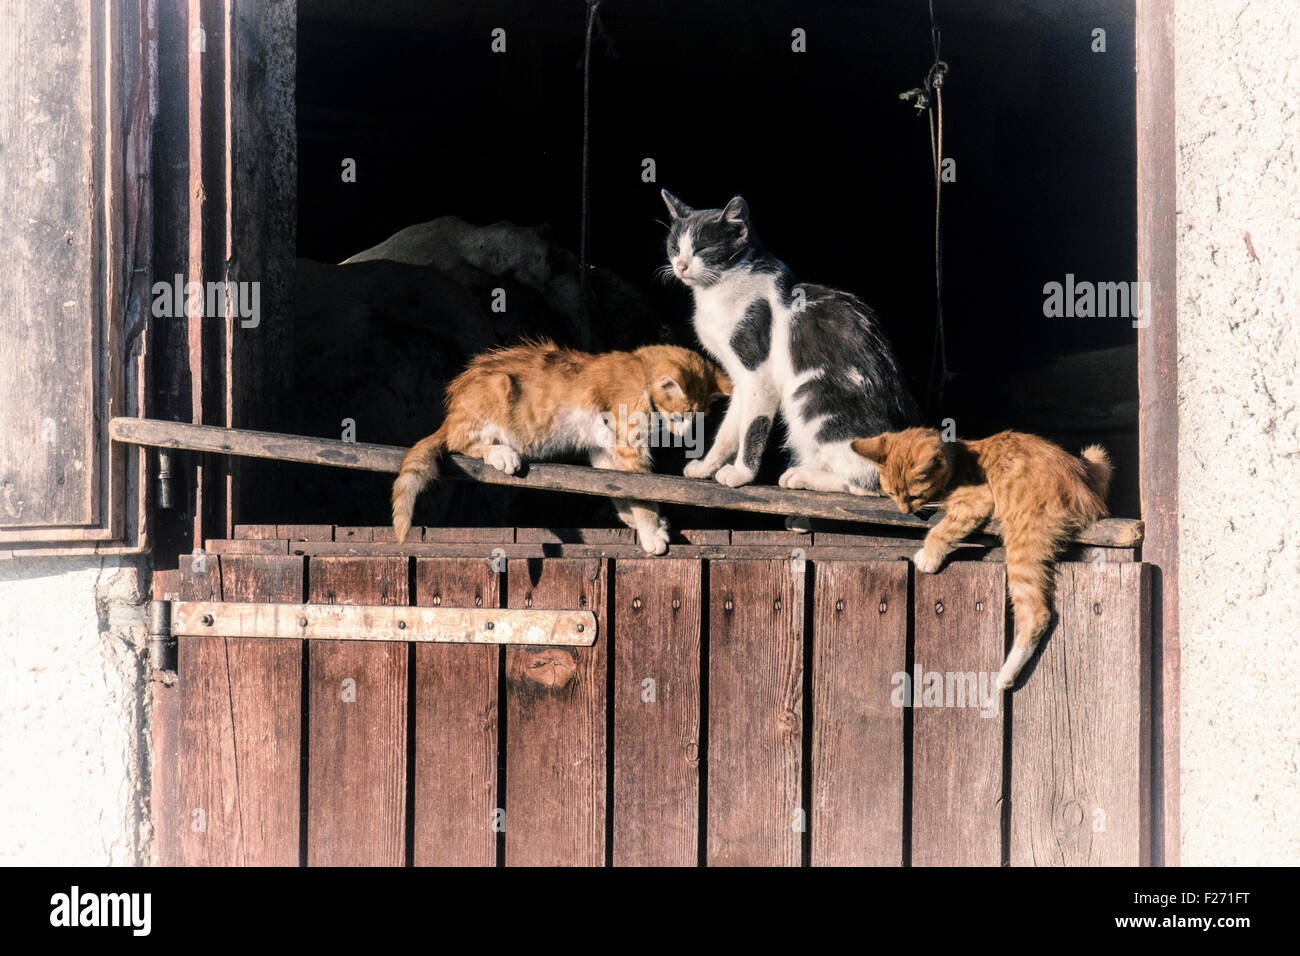 Farm cats and kittens sitting on a barn door Stock Photo